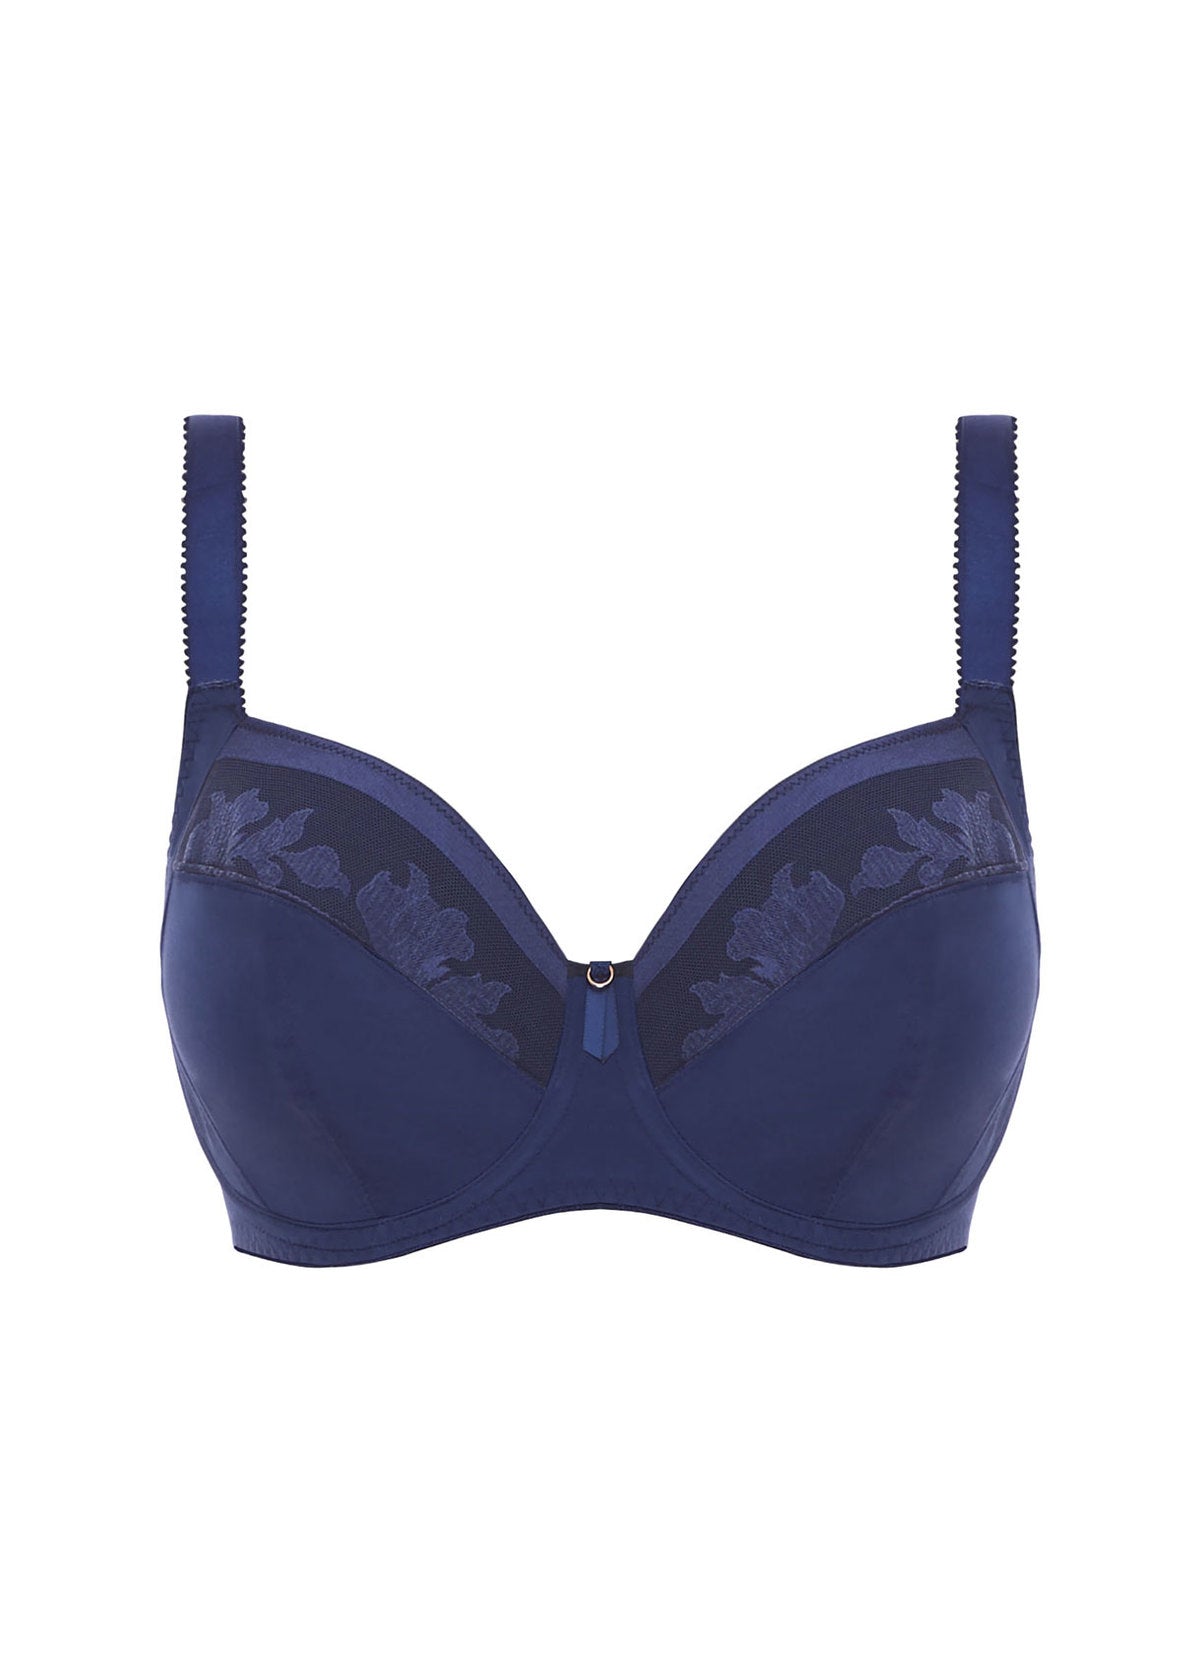 Illusion Navy Side Support Bra from Fantasie